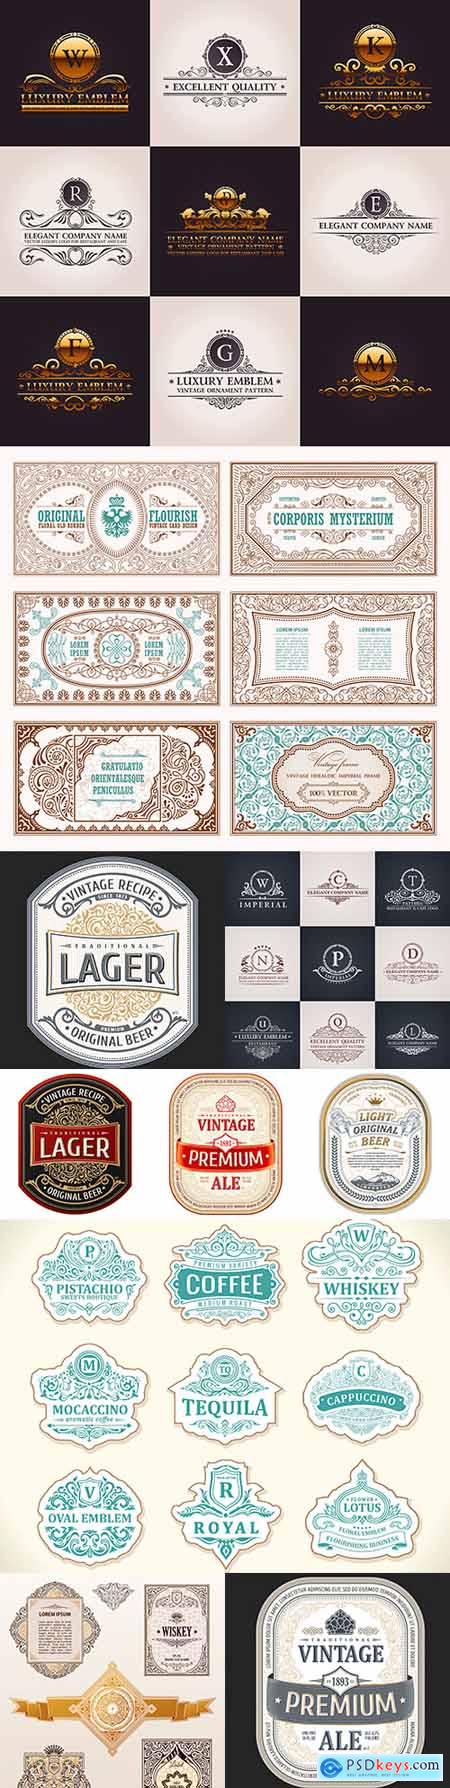 Vintage frames and luxury logos with ornament » Free Download Photoshop ...